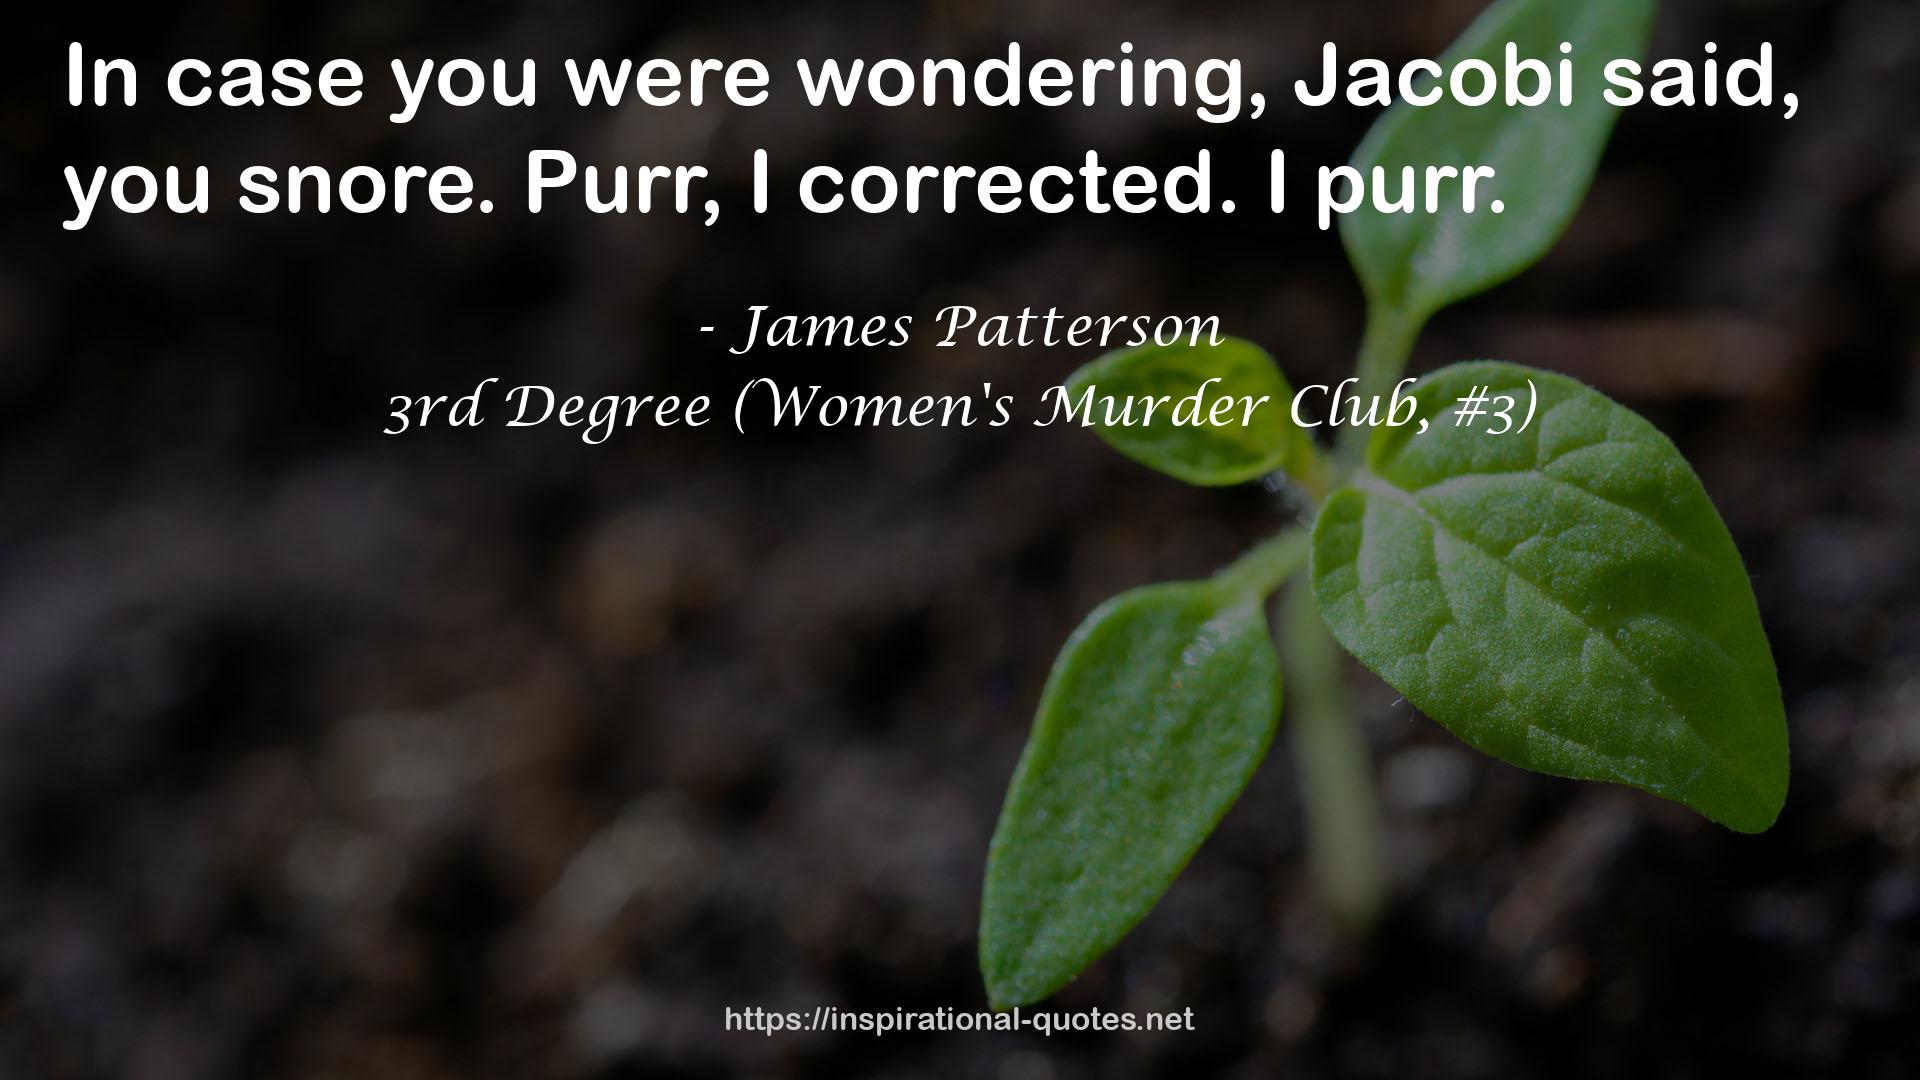 3rd Degree (Women's Murder Club, #3) QUOTES